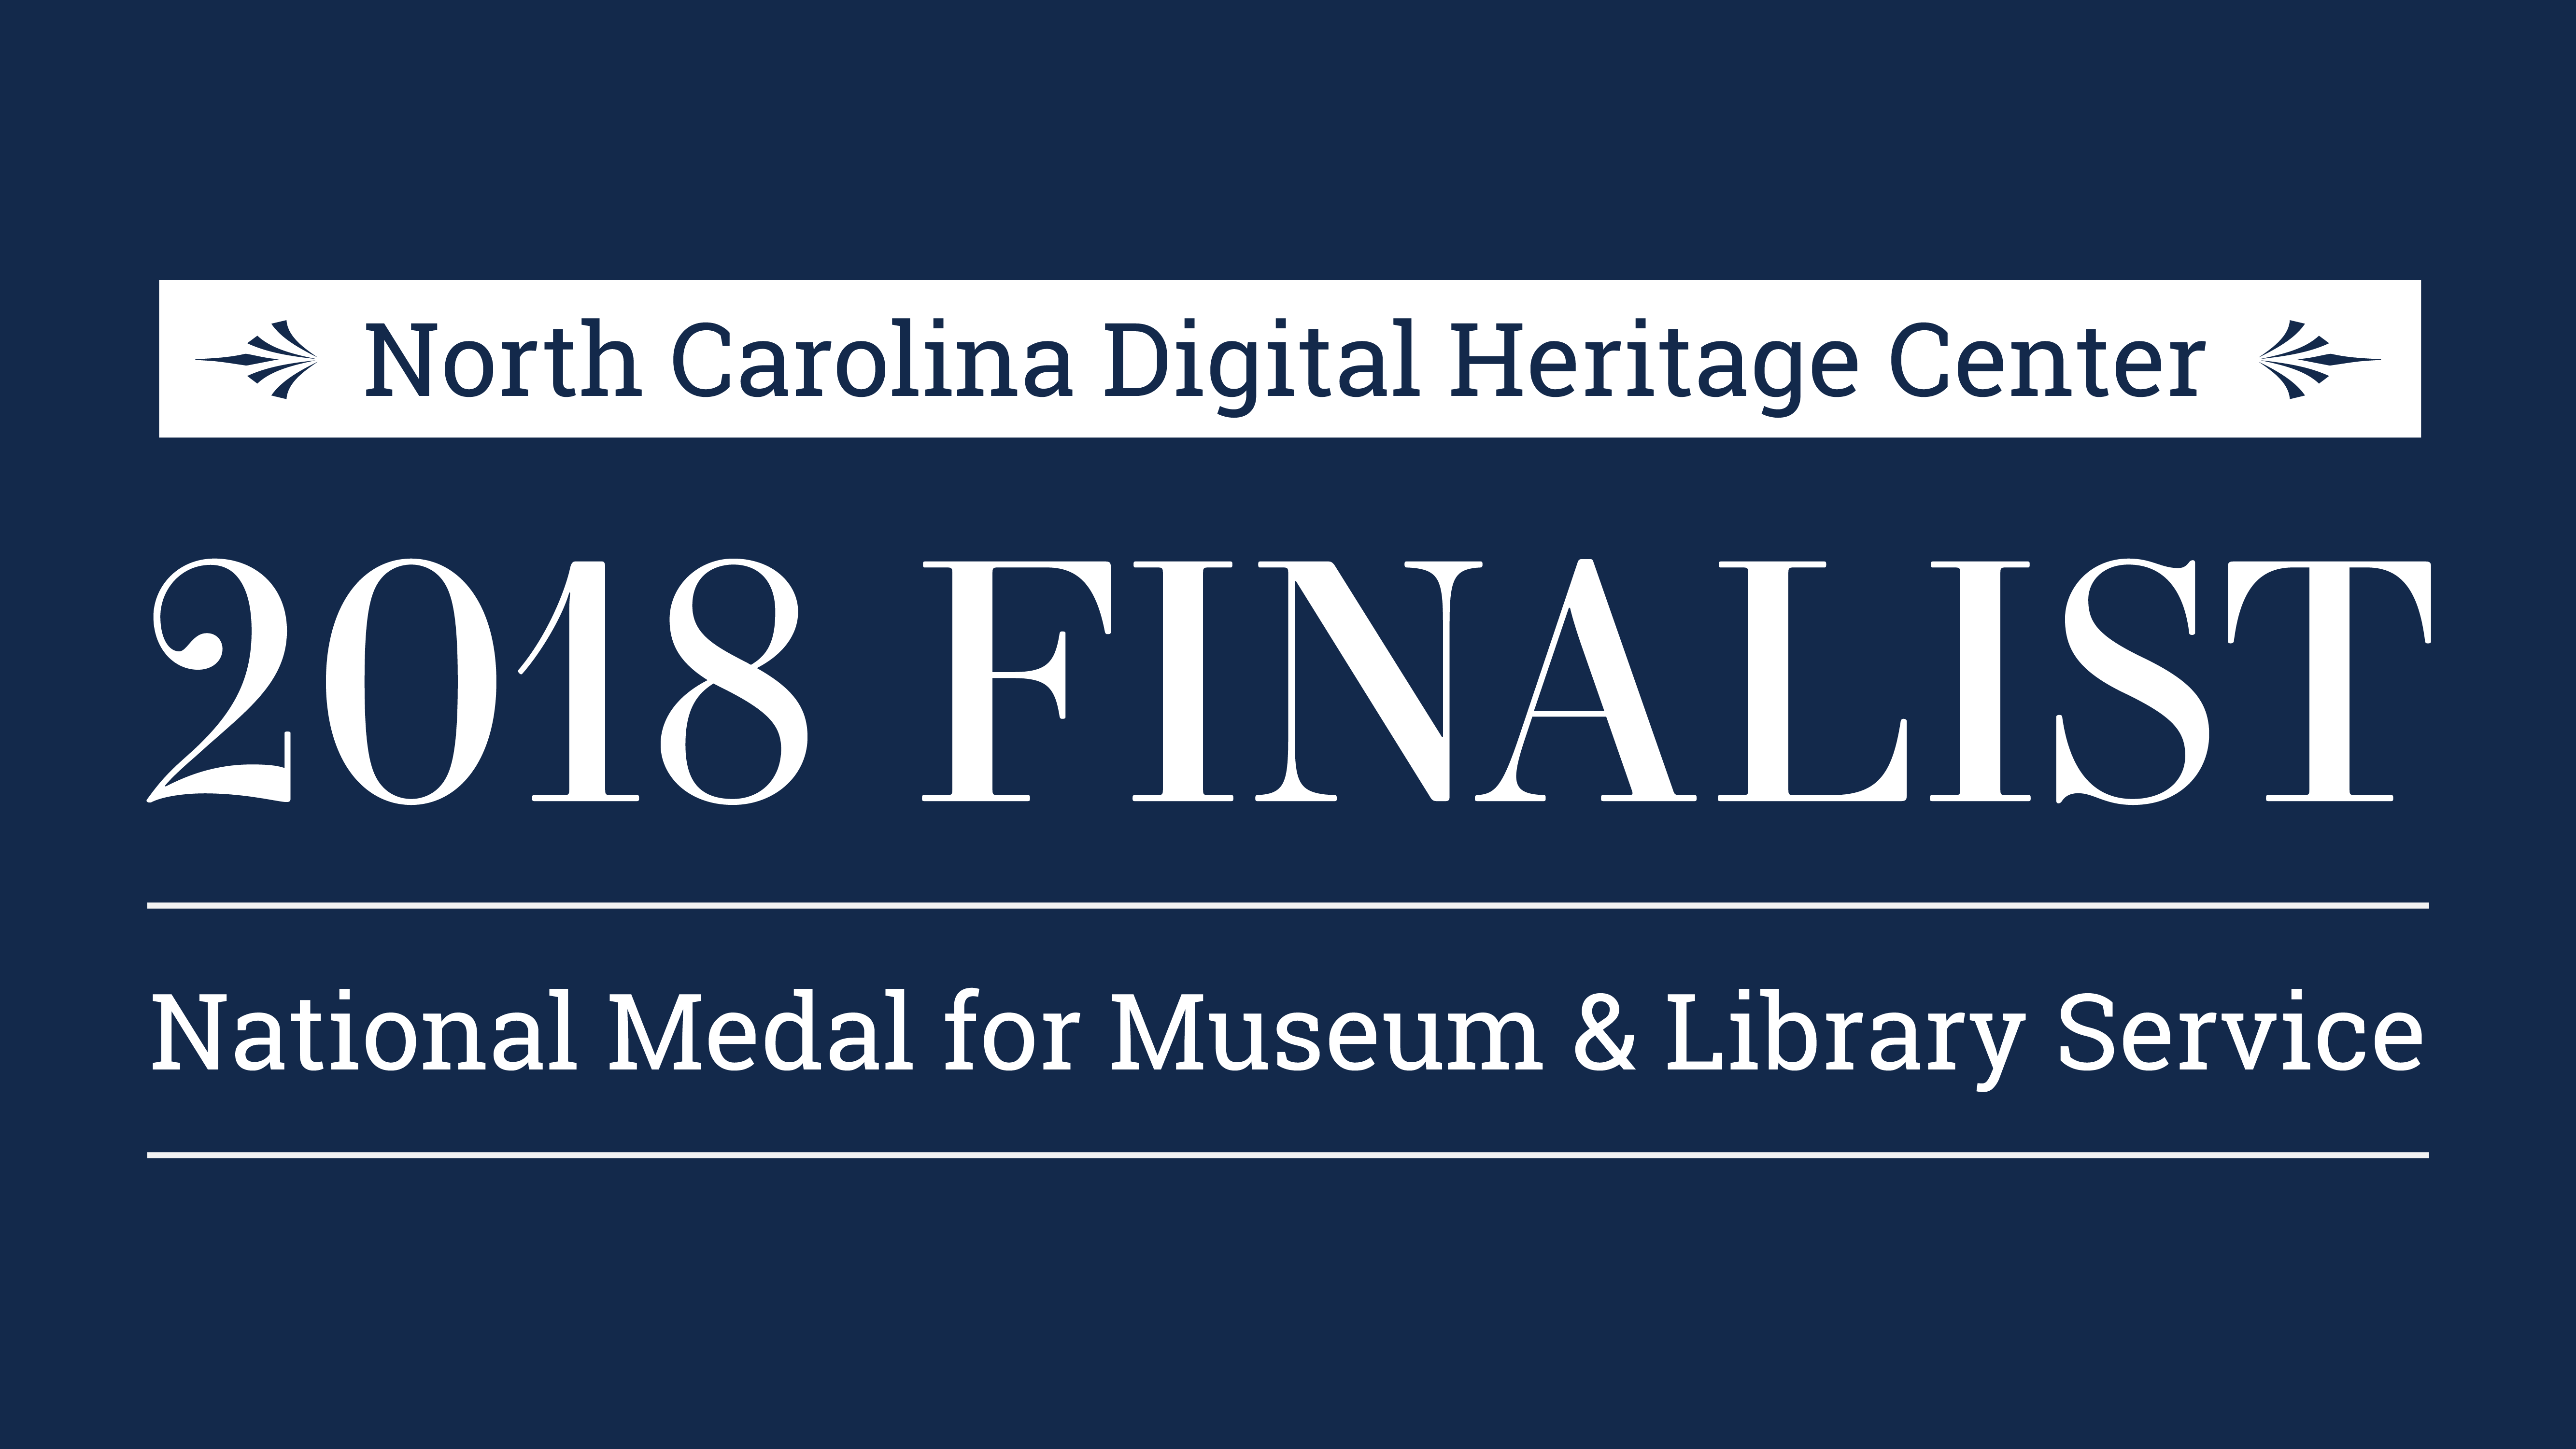 North Carolina Digital Heritage Center Named National Medal Finalist for Museum and Library Service